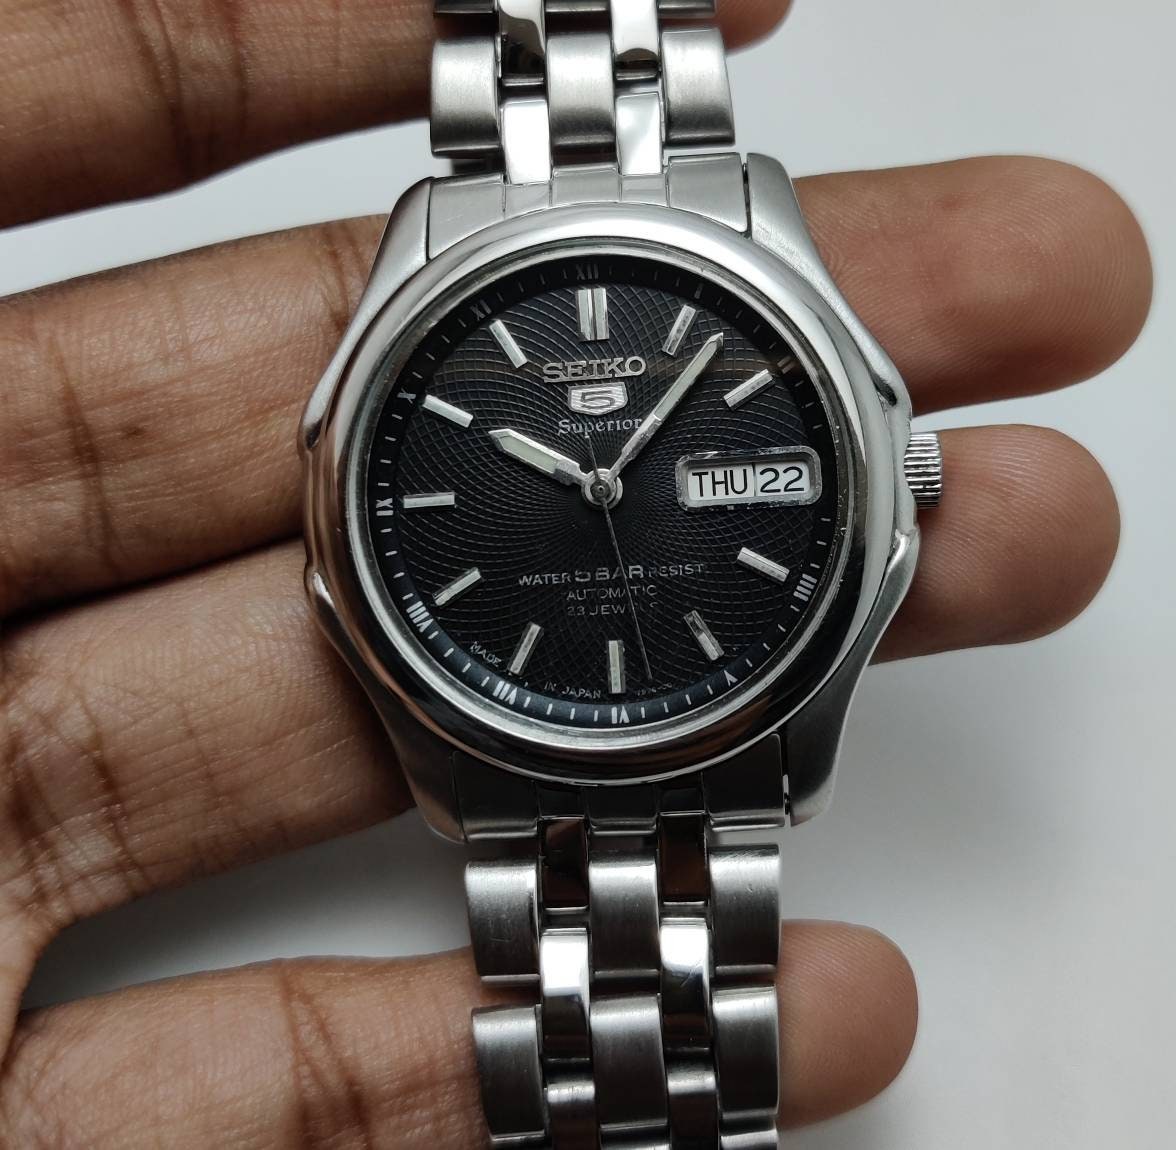 Extremely Rare SEIKO 5 Superior Automatic Watch Made in Japan - Etsy